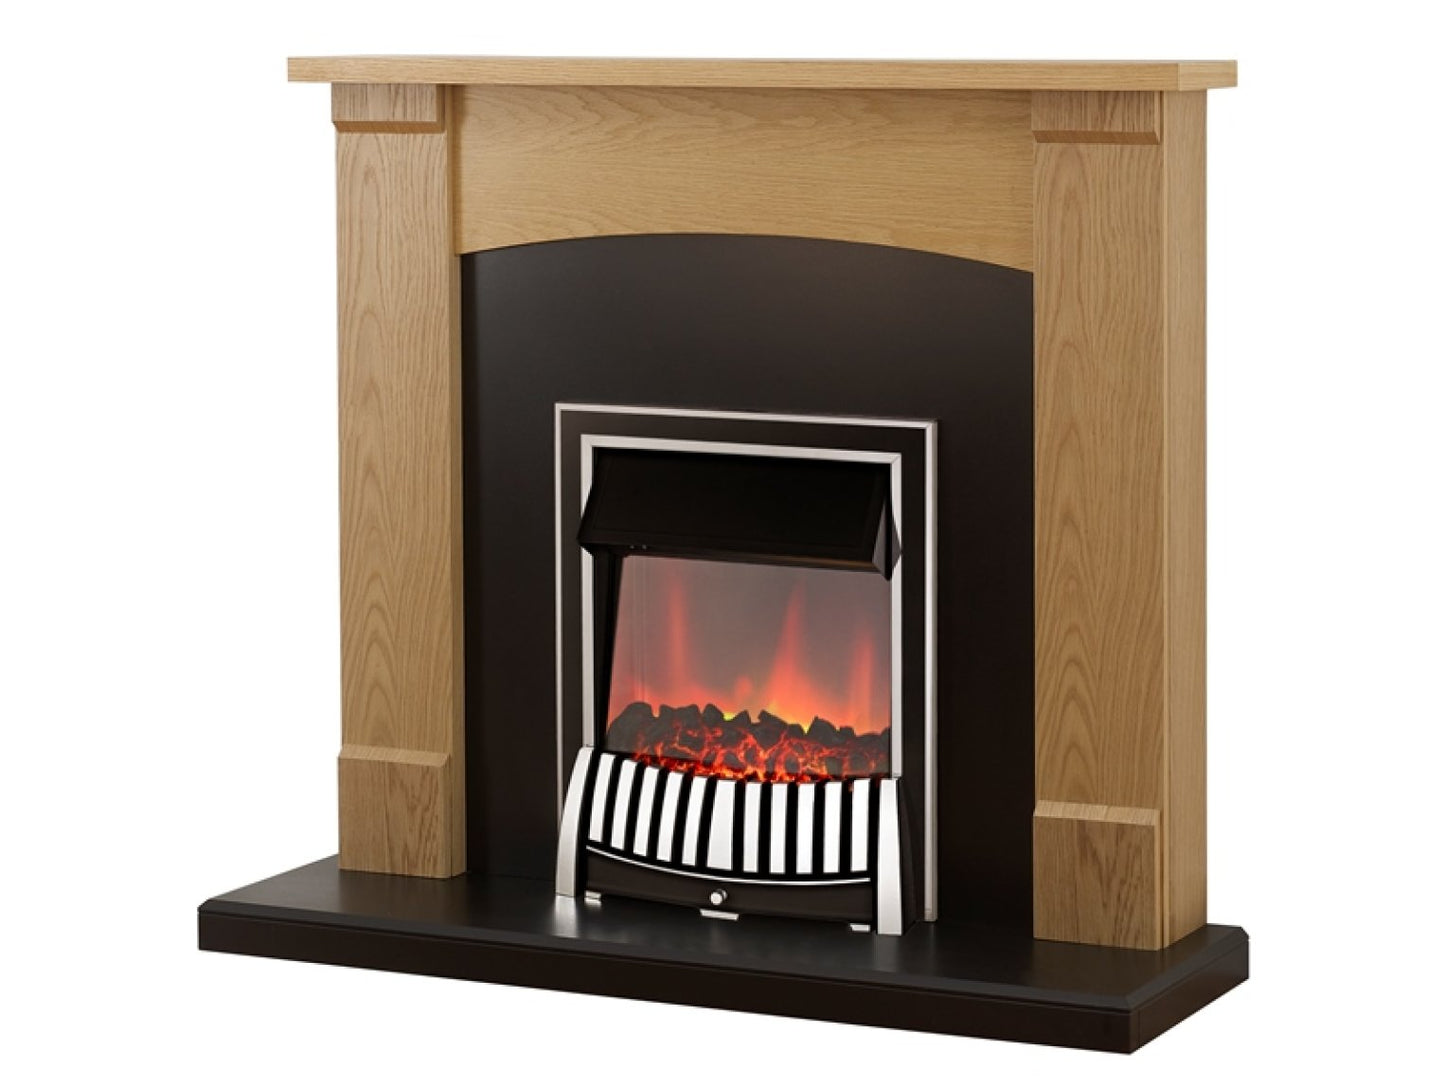 Adam Lonsdale Fireplace Suite in Oak with Elan Electric Fire in Chrome, 48 Inch